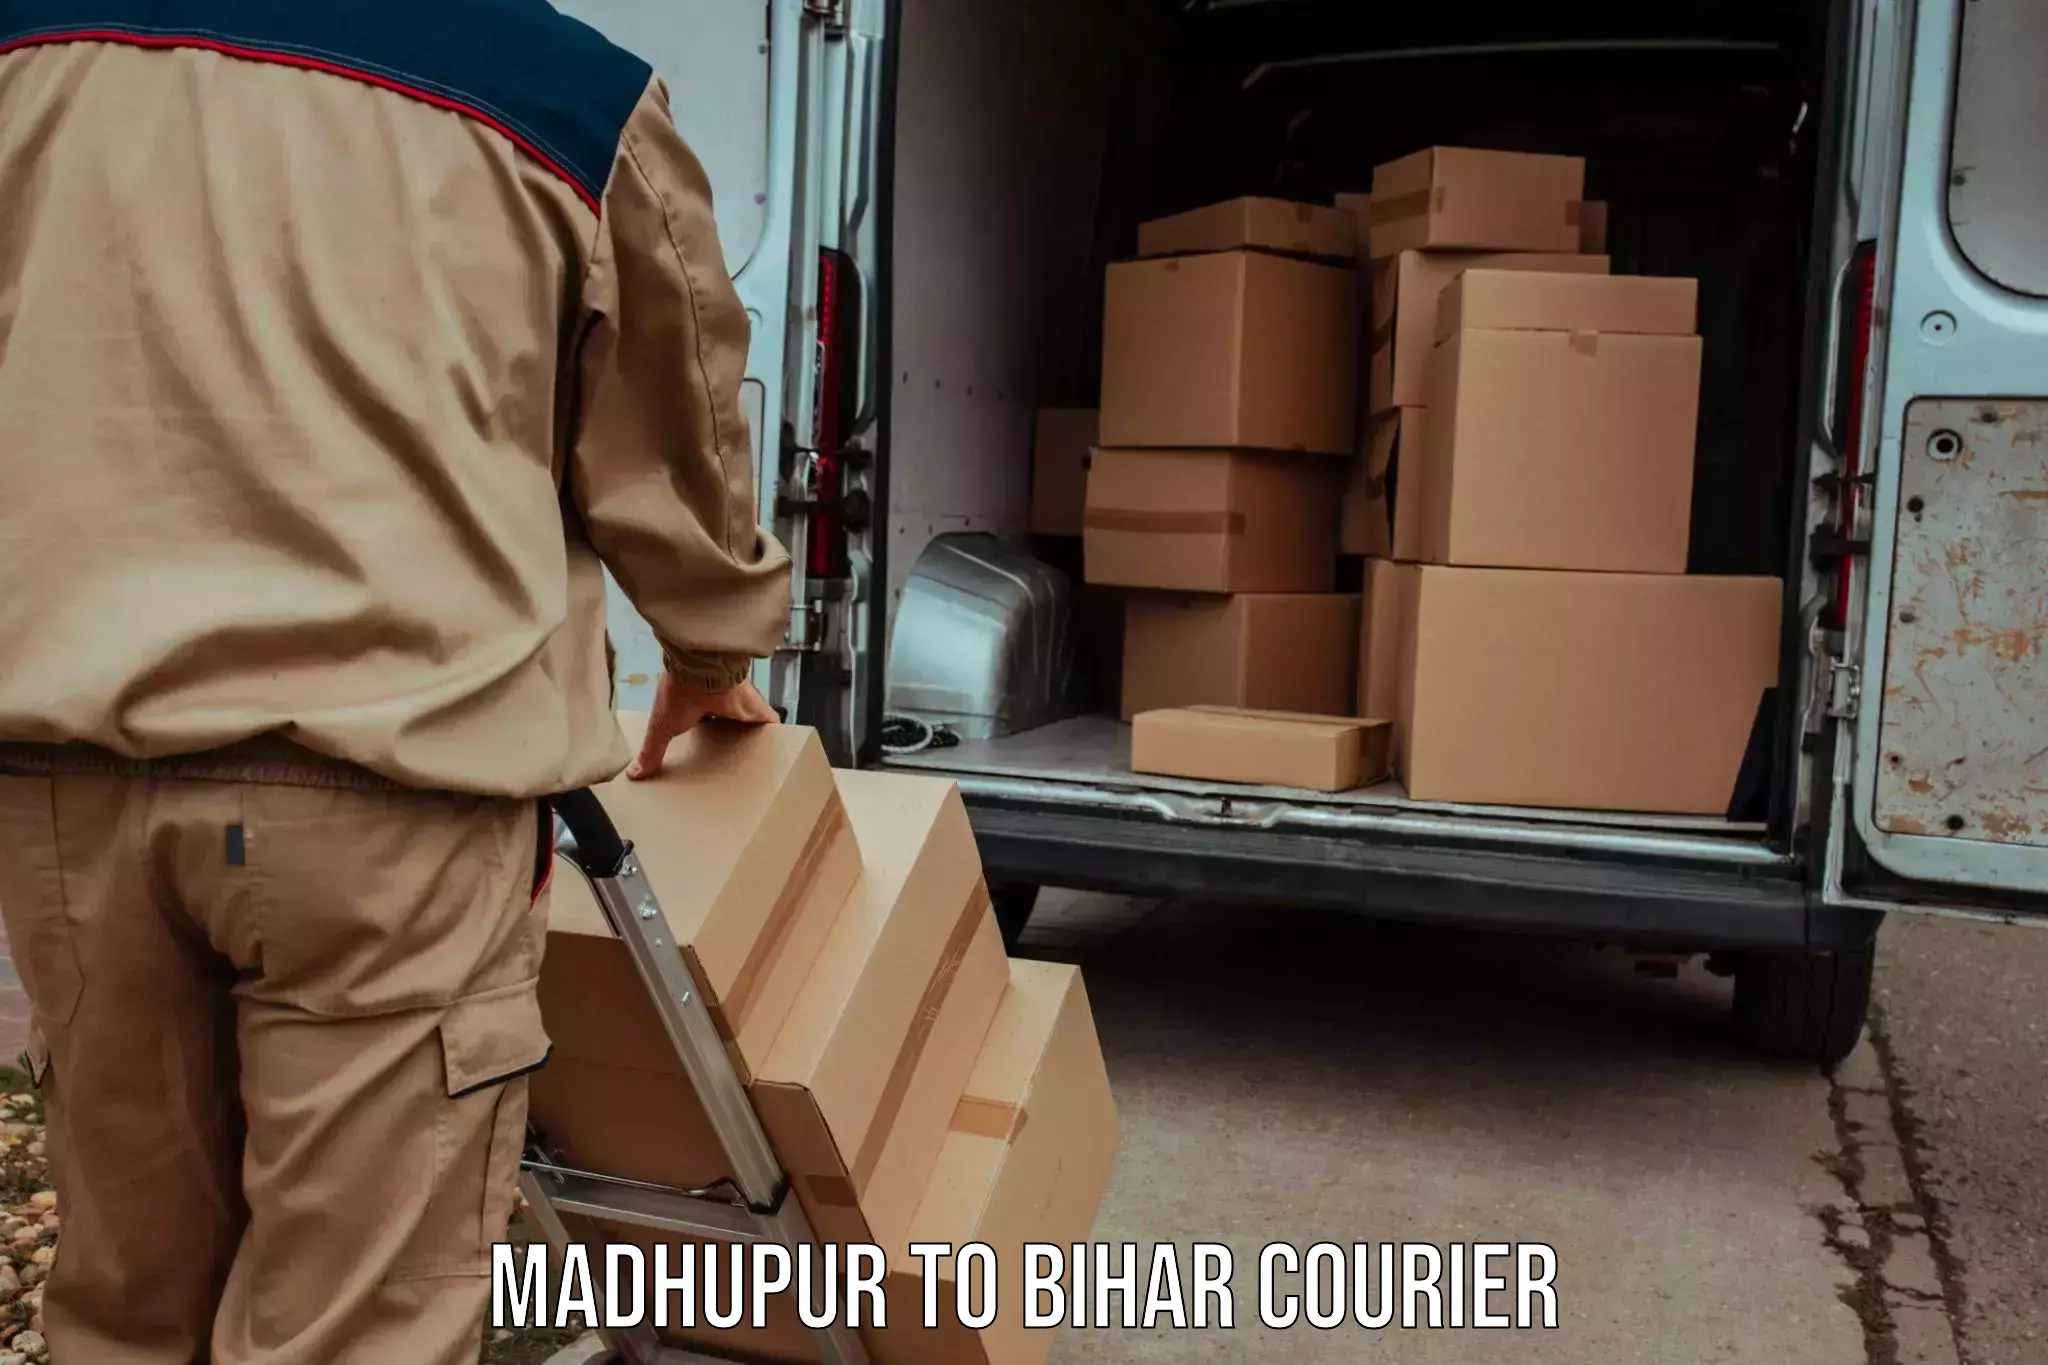 24/7 courier service in Madhupur to Mohammadpur